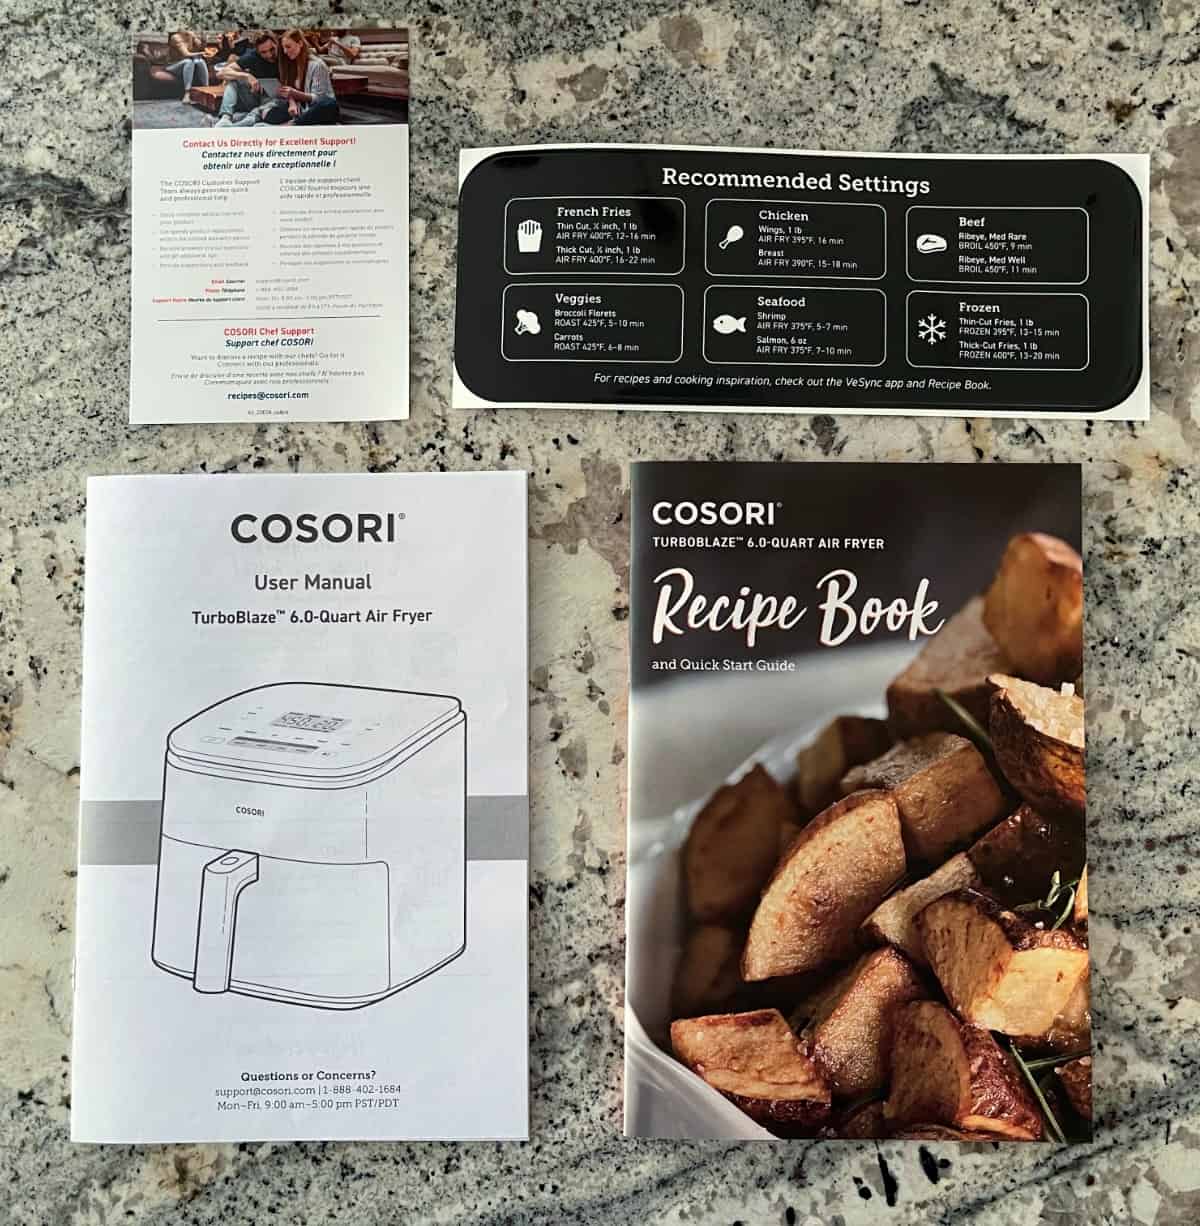 Cosori air fryer user manual, recipe booklet, recommended settings and cook times, and customer support contact card.